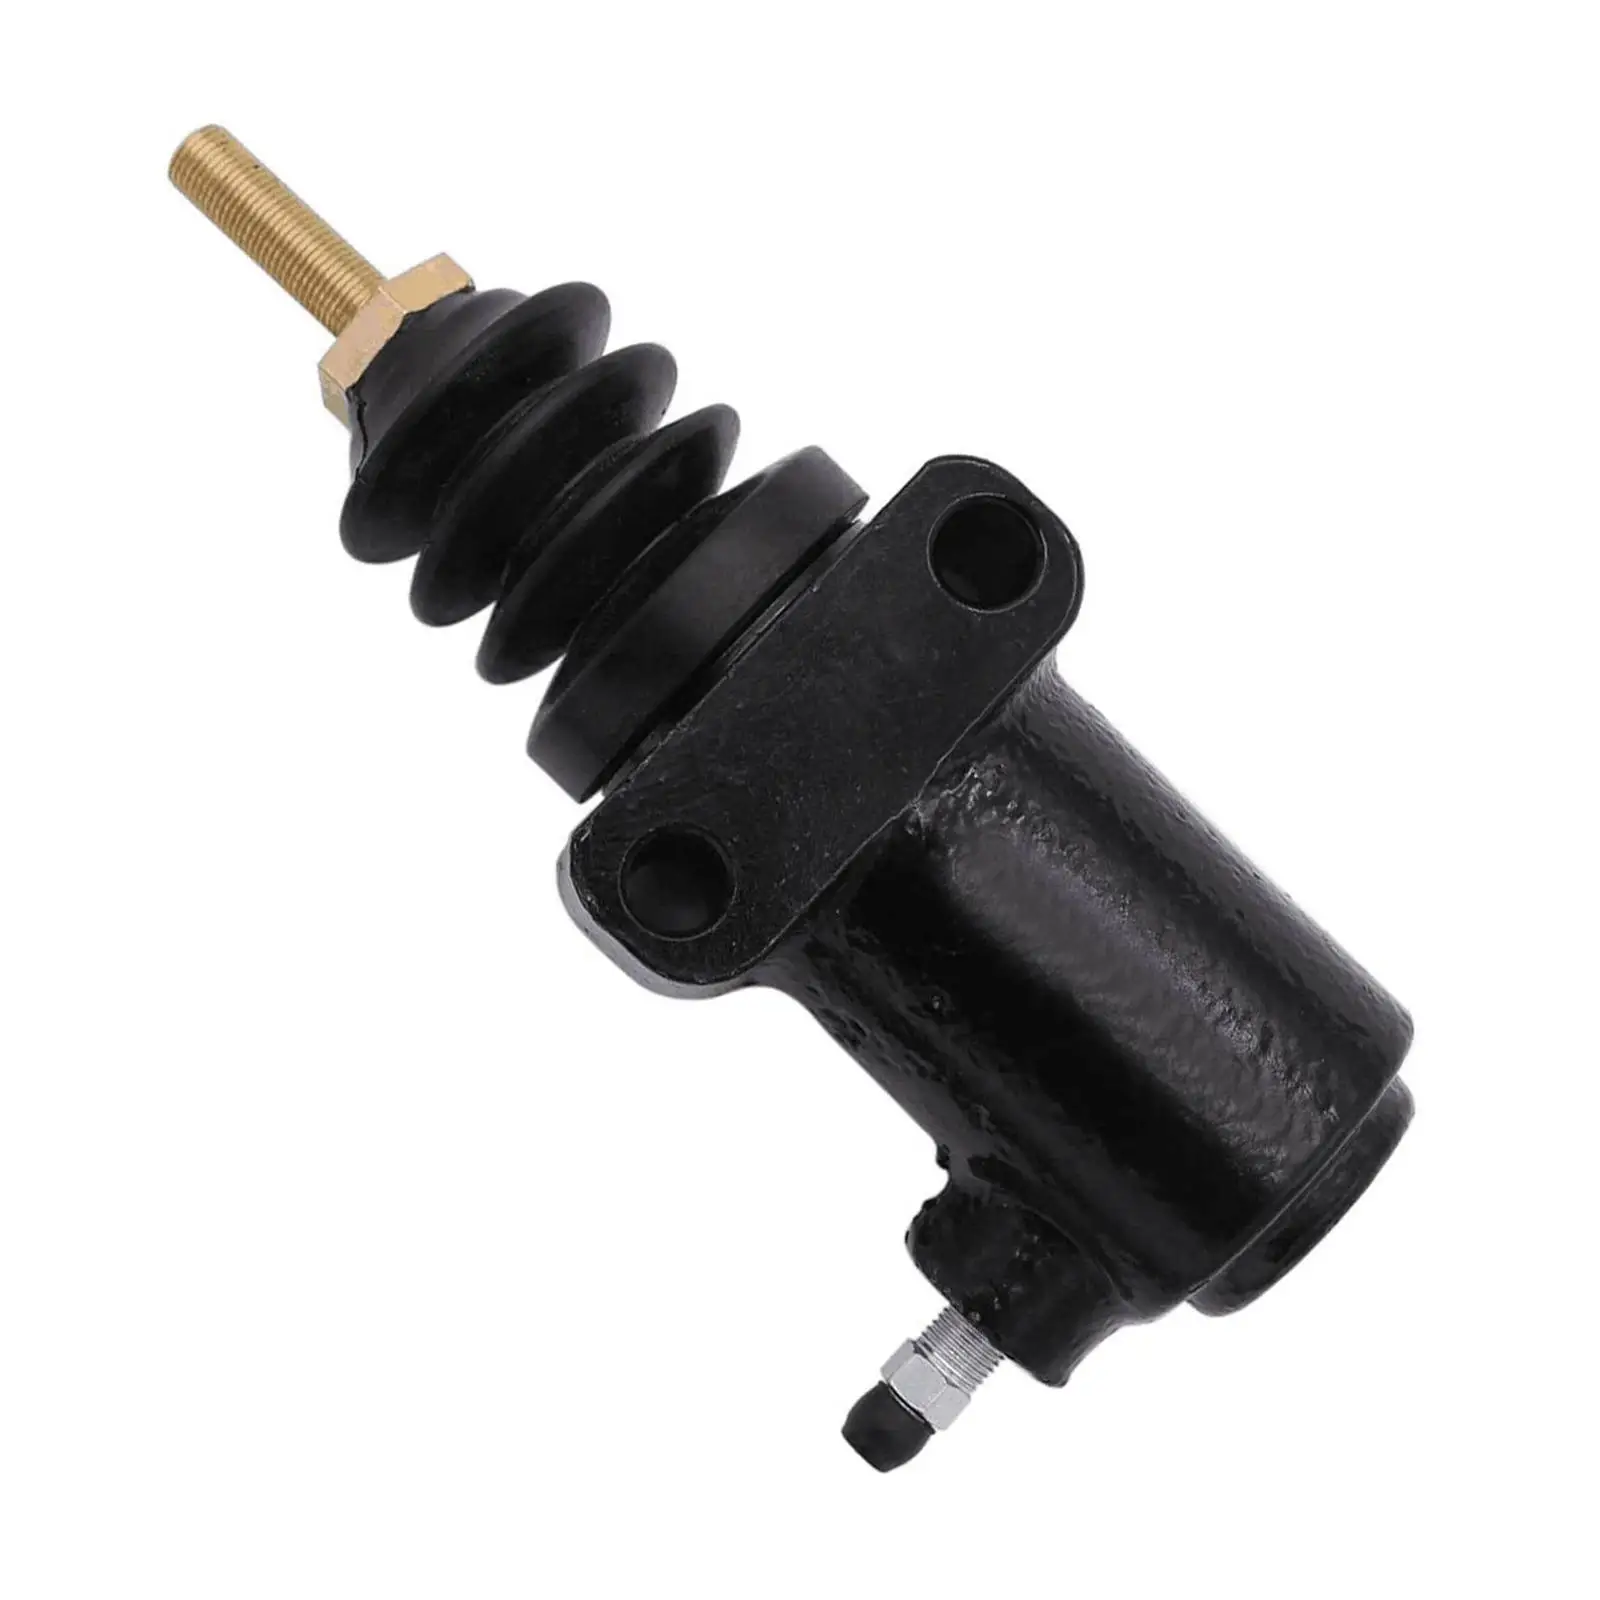 Truck Clutch Slave Cylinder 8075008 8079571 for Vnl Direct Replaces Spare Parts Accessory Professional